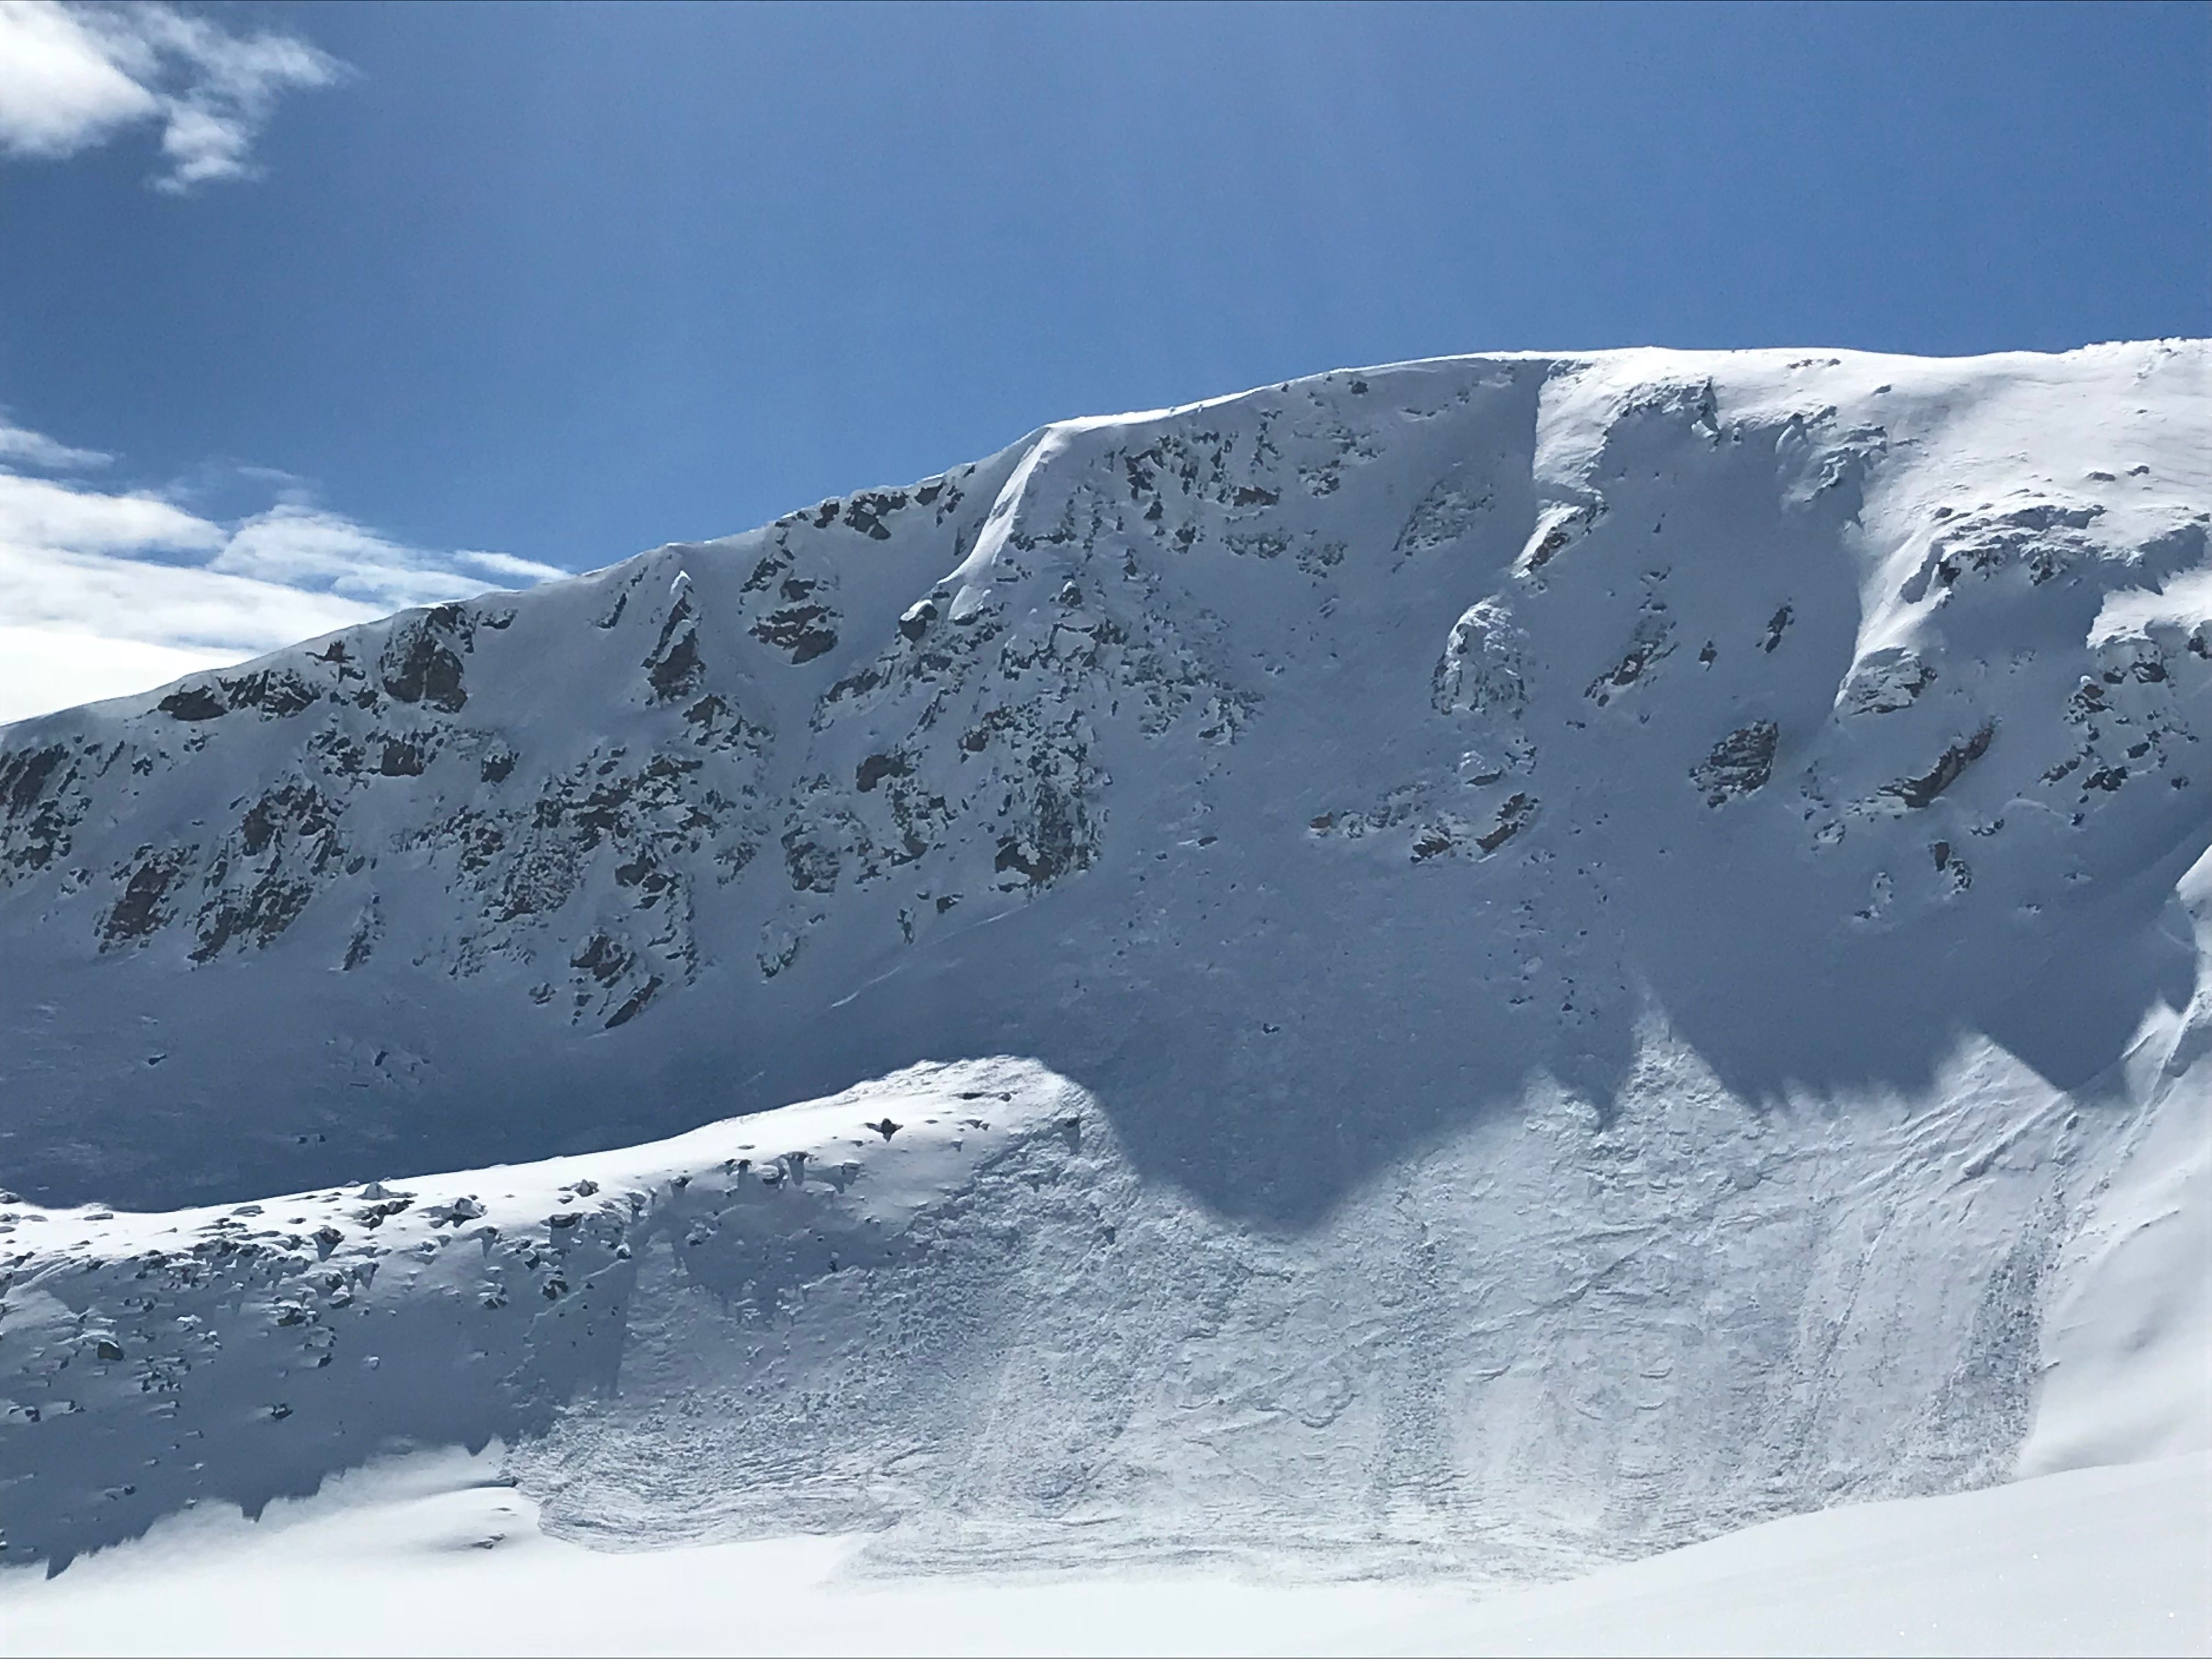 Spontaneous avalanches